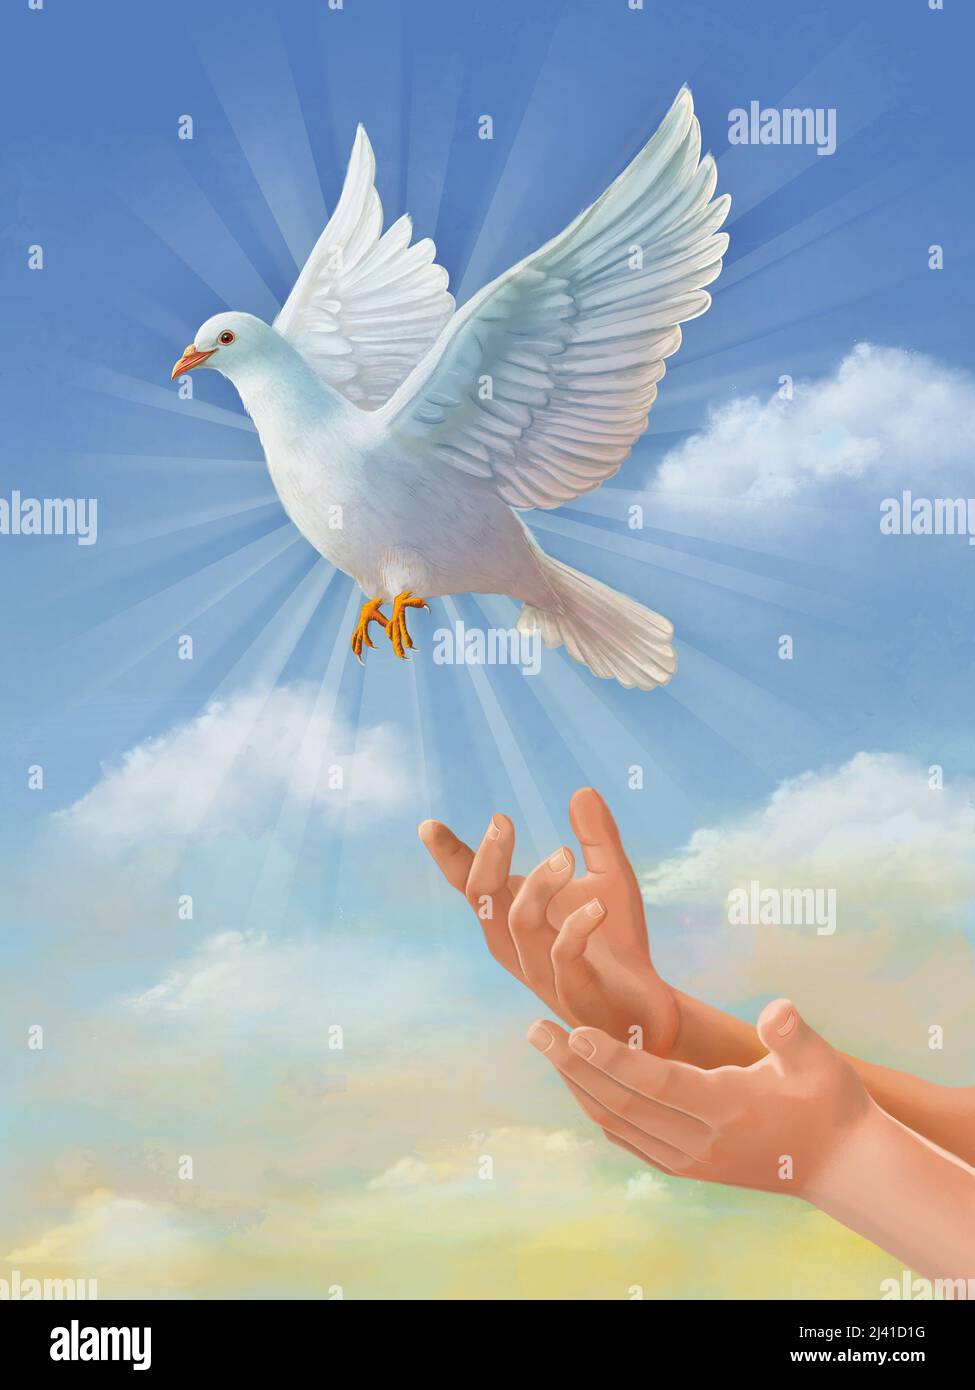 White dove, symbol of peace, flying through the sky. Original digital illustration, painted using a graphic tablet. Stock Photo